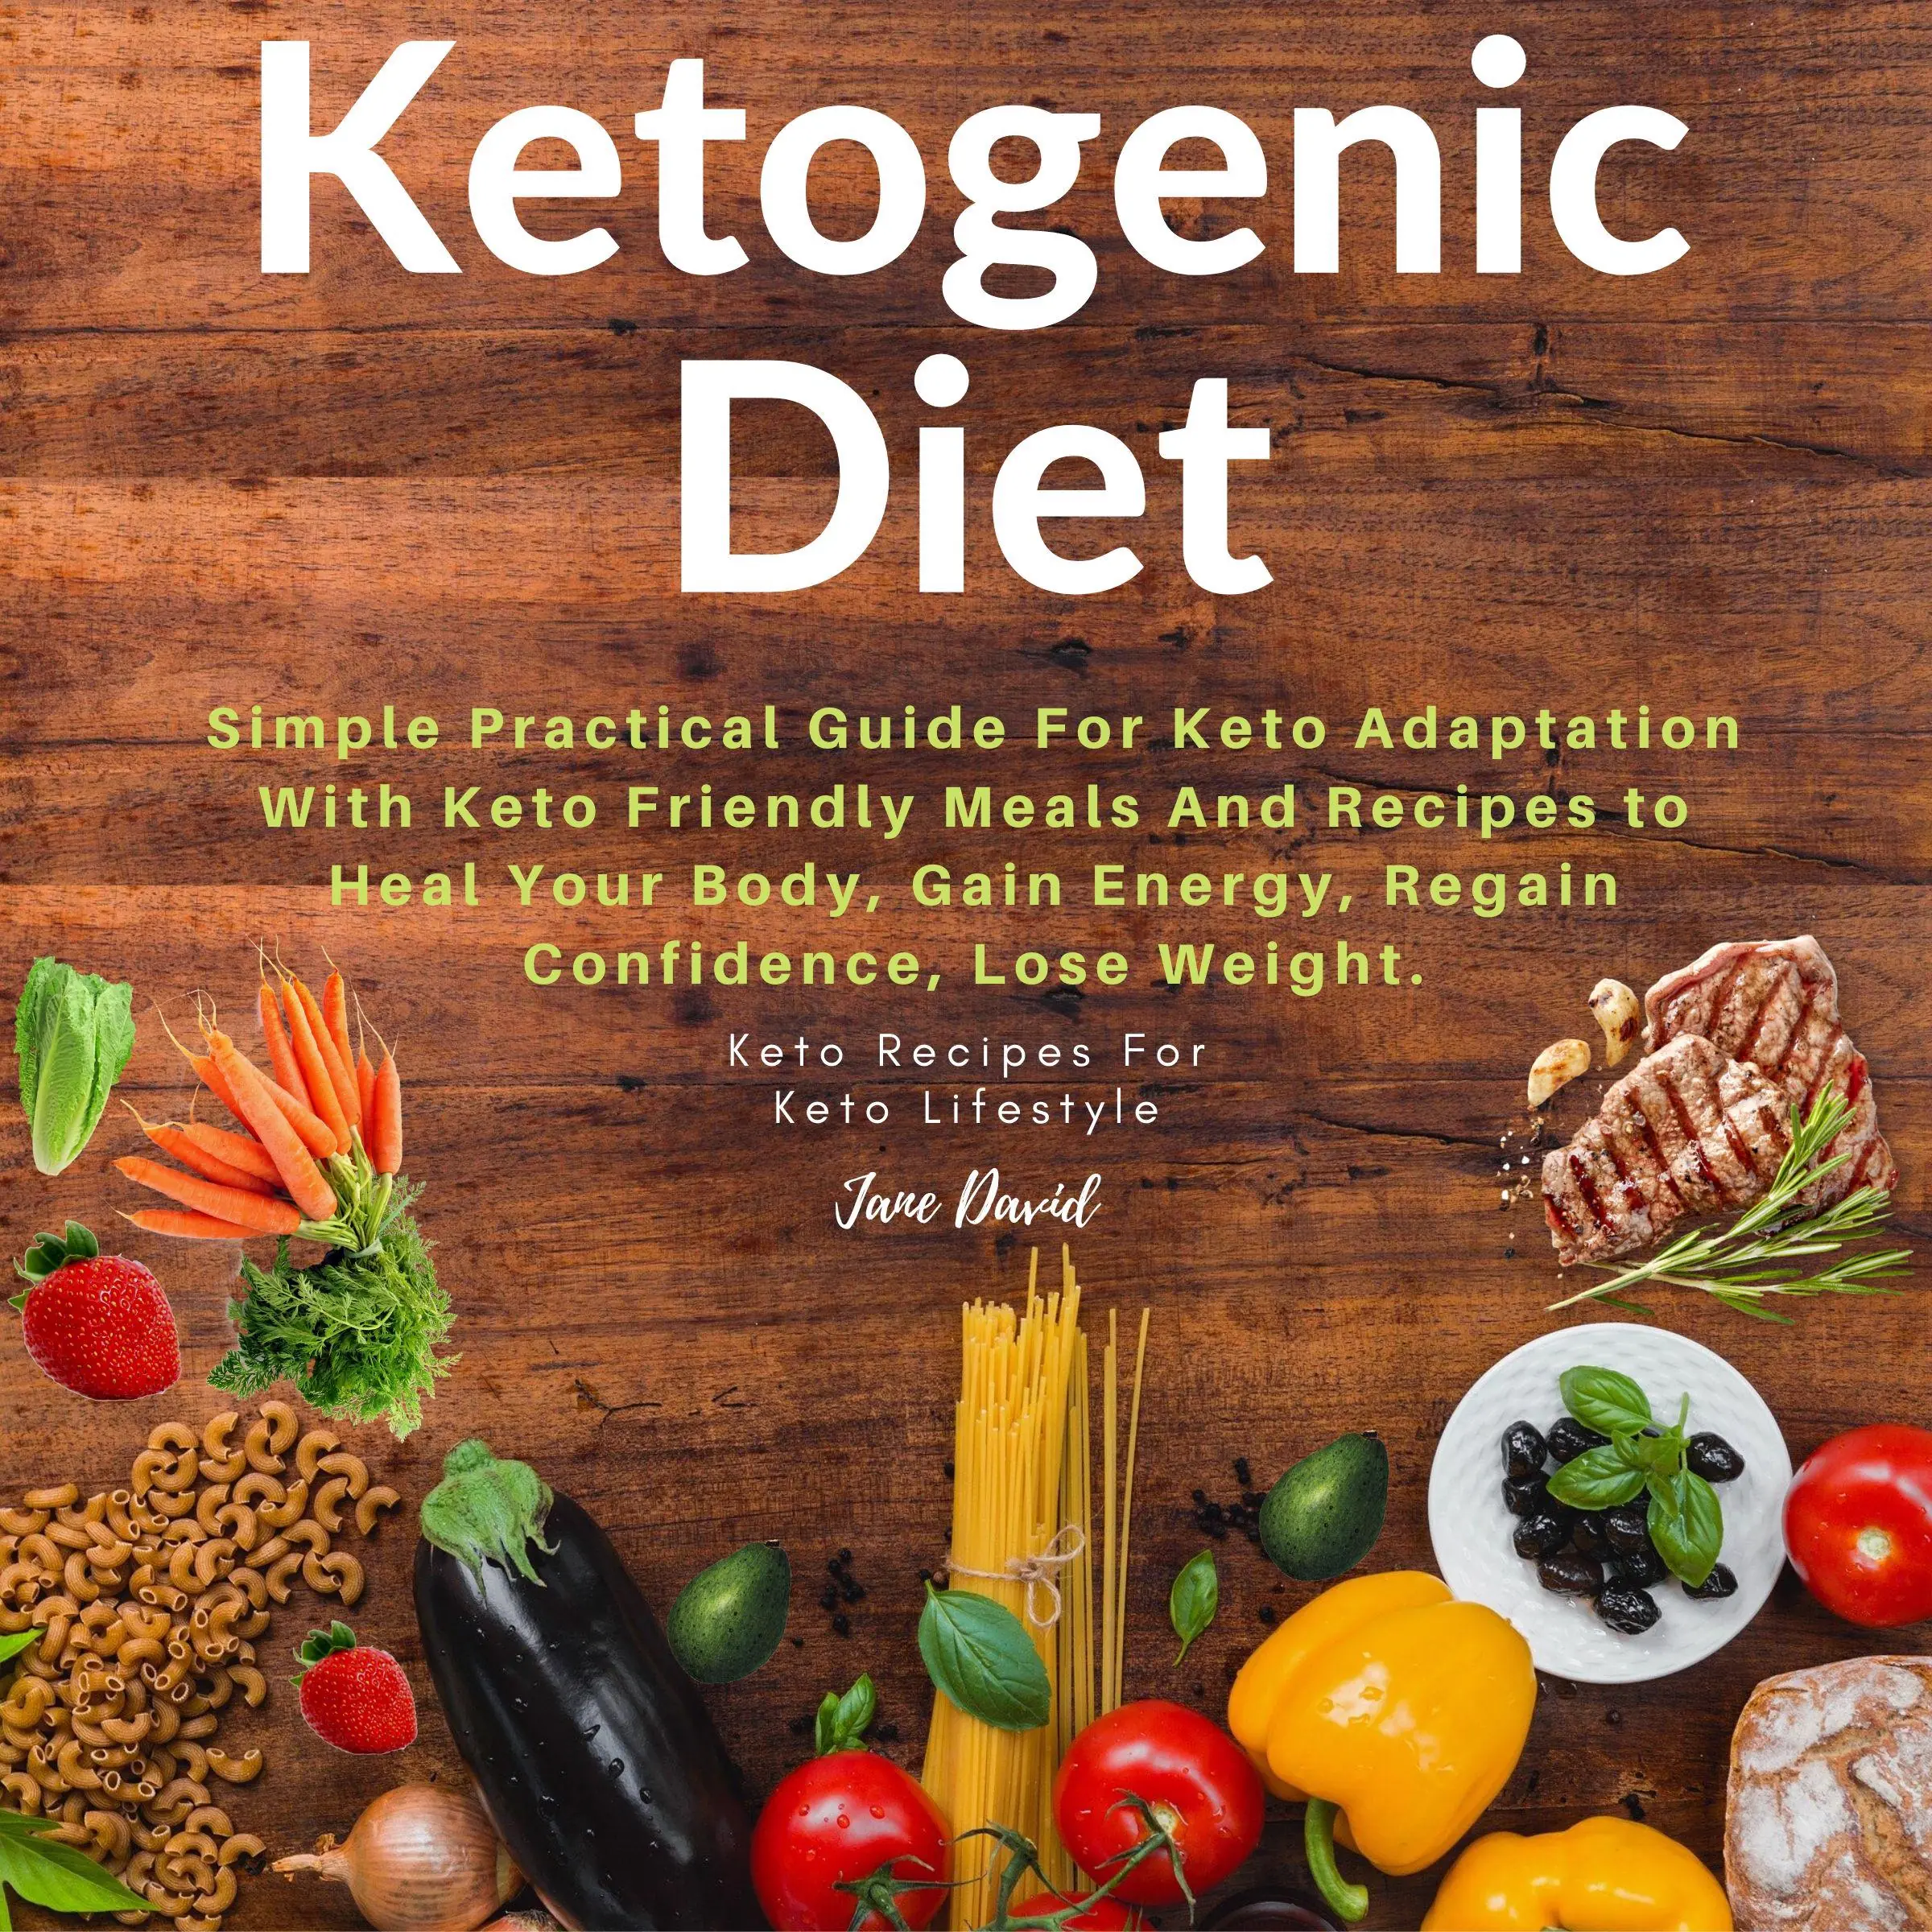 Ketogenic Diet: Simple Practical Guide For Keto Adaptation with Keto Friendly Meals and Recipes to Heal Your Body, Gain Energy, Regain Confidence, Lose Fat and Build Muscles (Keto Diet Plan) Audiobook by Jane David